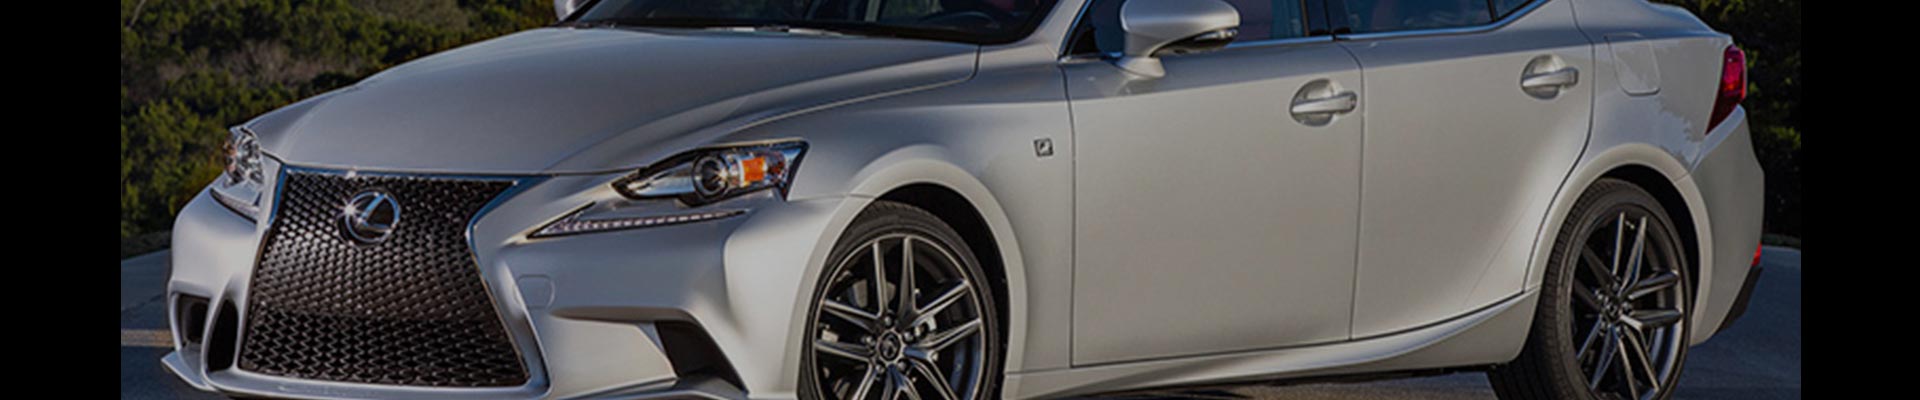 Shop Replacement and OEM 2009 Lexus IS350 Parts with Discounted Price on the Net